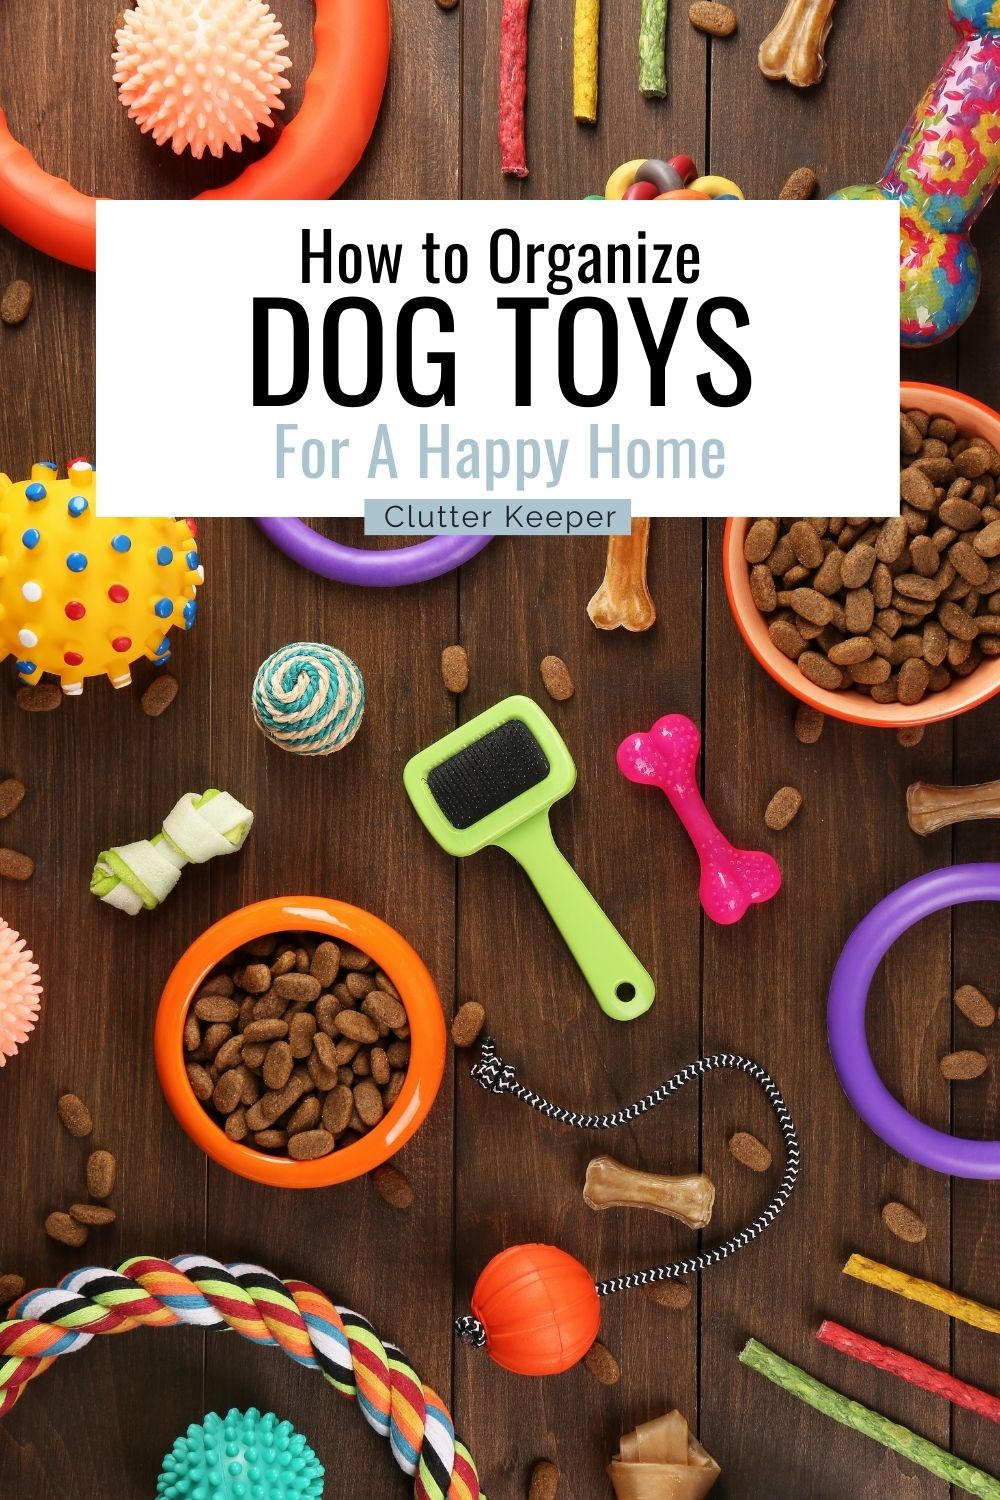 How to organize dog toys for a happy home.